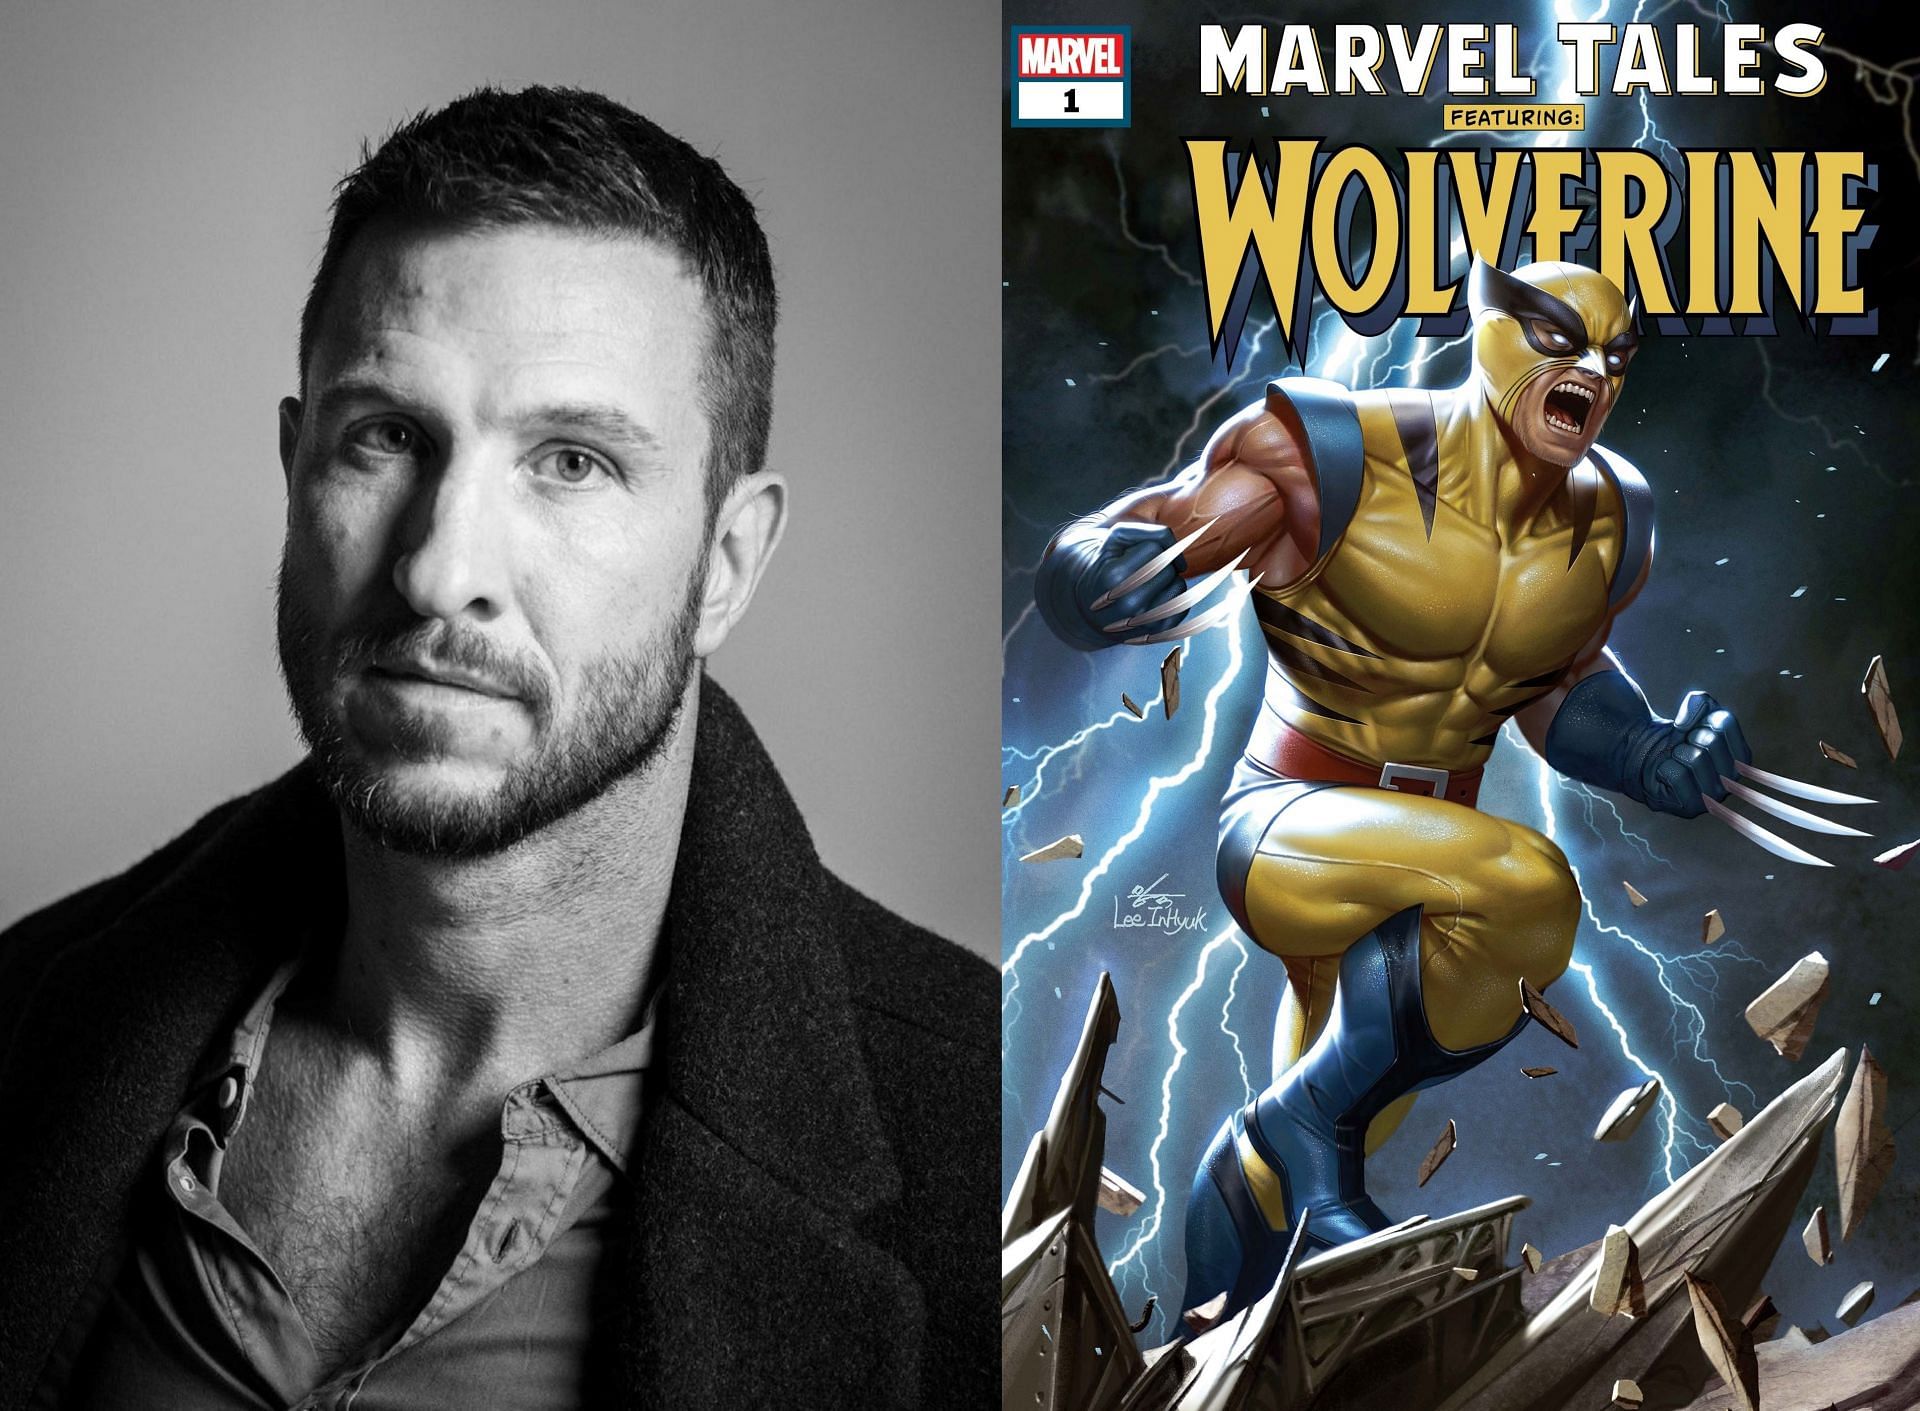 How tall is Pablo Schreiber? Halo star confirms Wolverine talks with Marvel